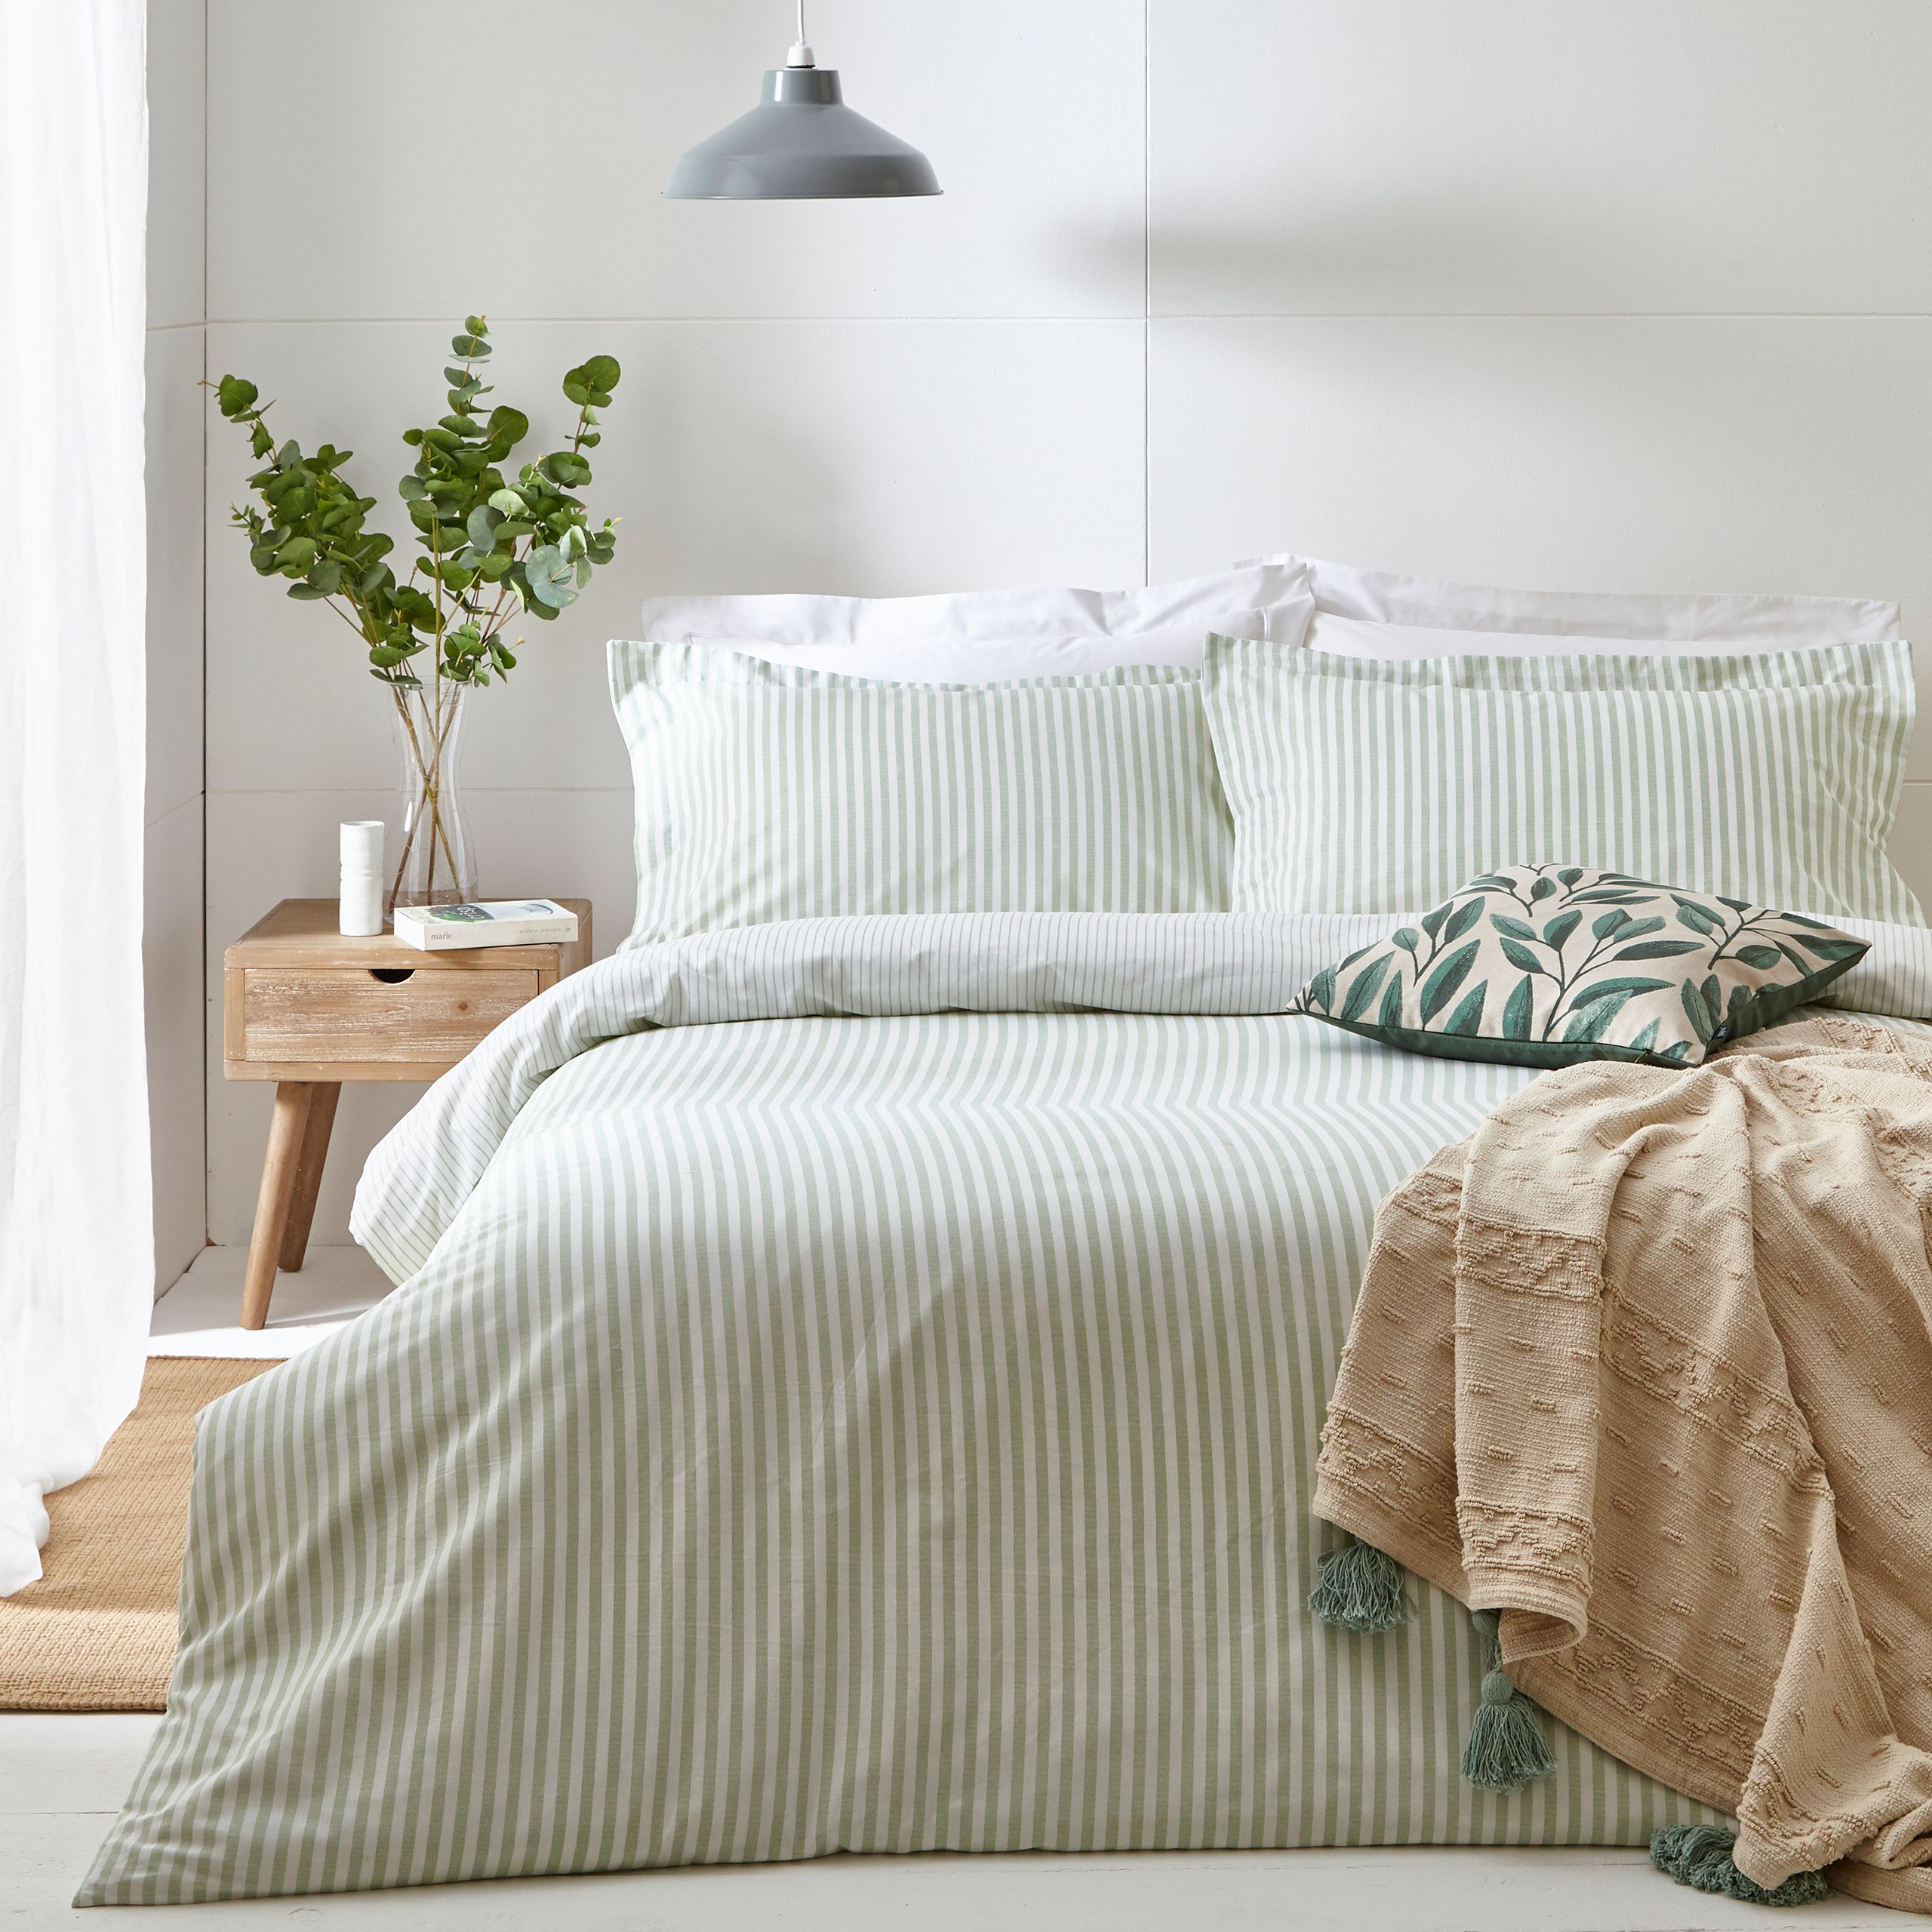 This duvet cover set is both a contemporary and classic addition to your home. The reversible subtle mélange print provides a luxurious woven striped appearance. The included matching pillowcases creates a simple yet relaxed look with their Oxford Borders; alongside the reversible stripe design that adds an effortless relaxed look to your bedroom. Choose your favourite side to fit with your style or flip sides to give your bedroom a midweek refresh.